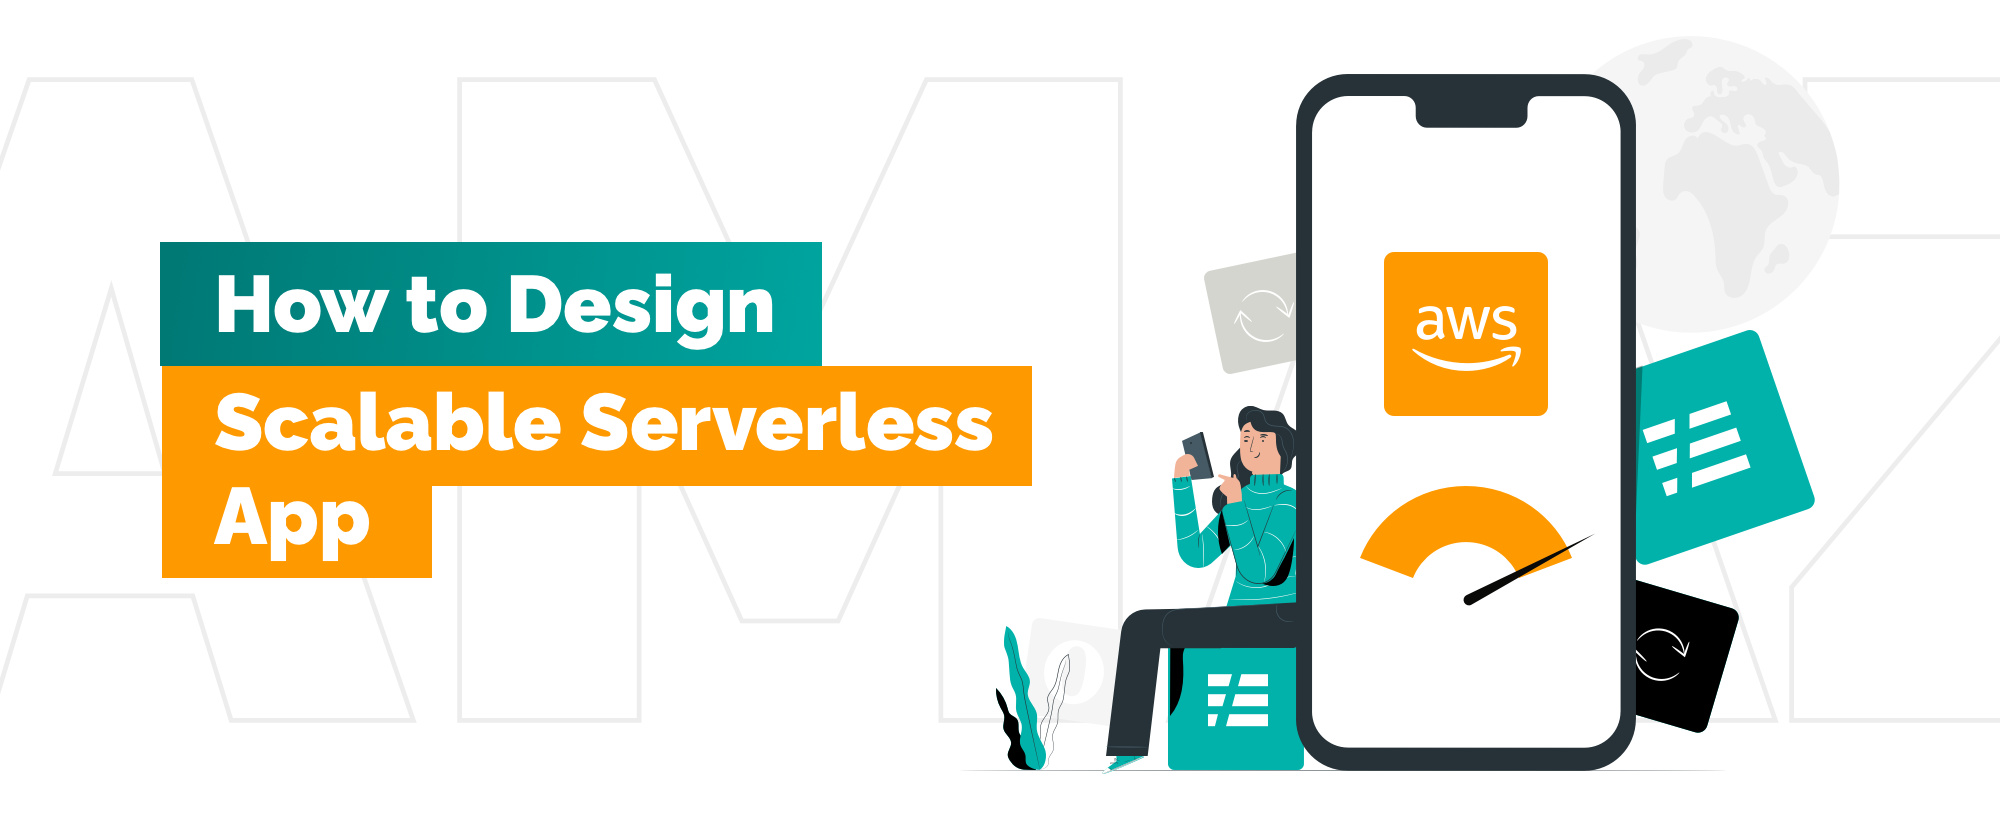 How to Design a Scalable Serverless Application on AWS?